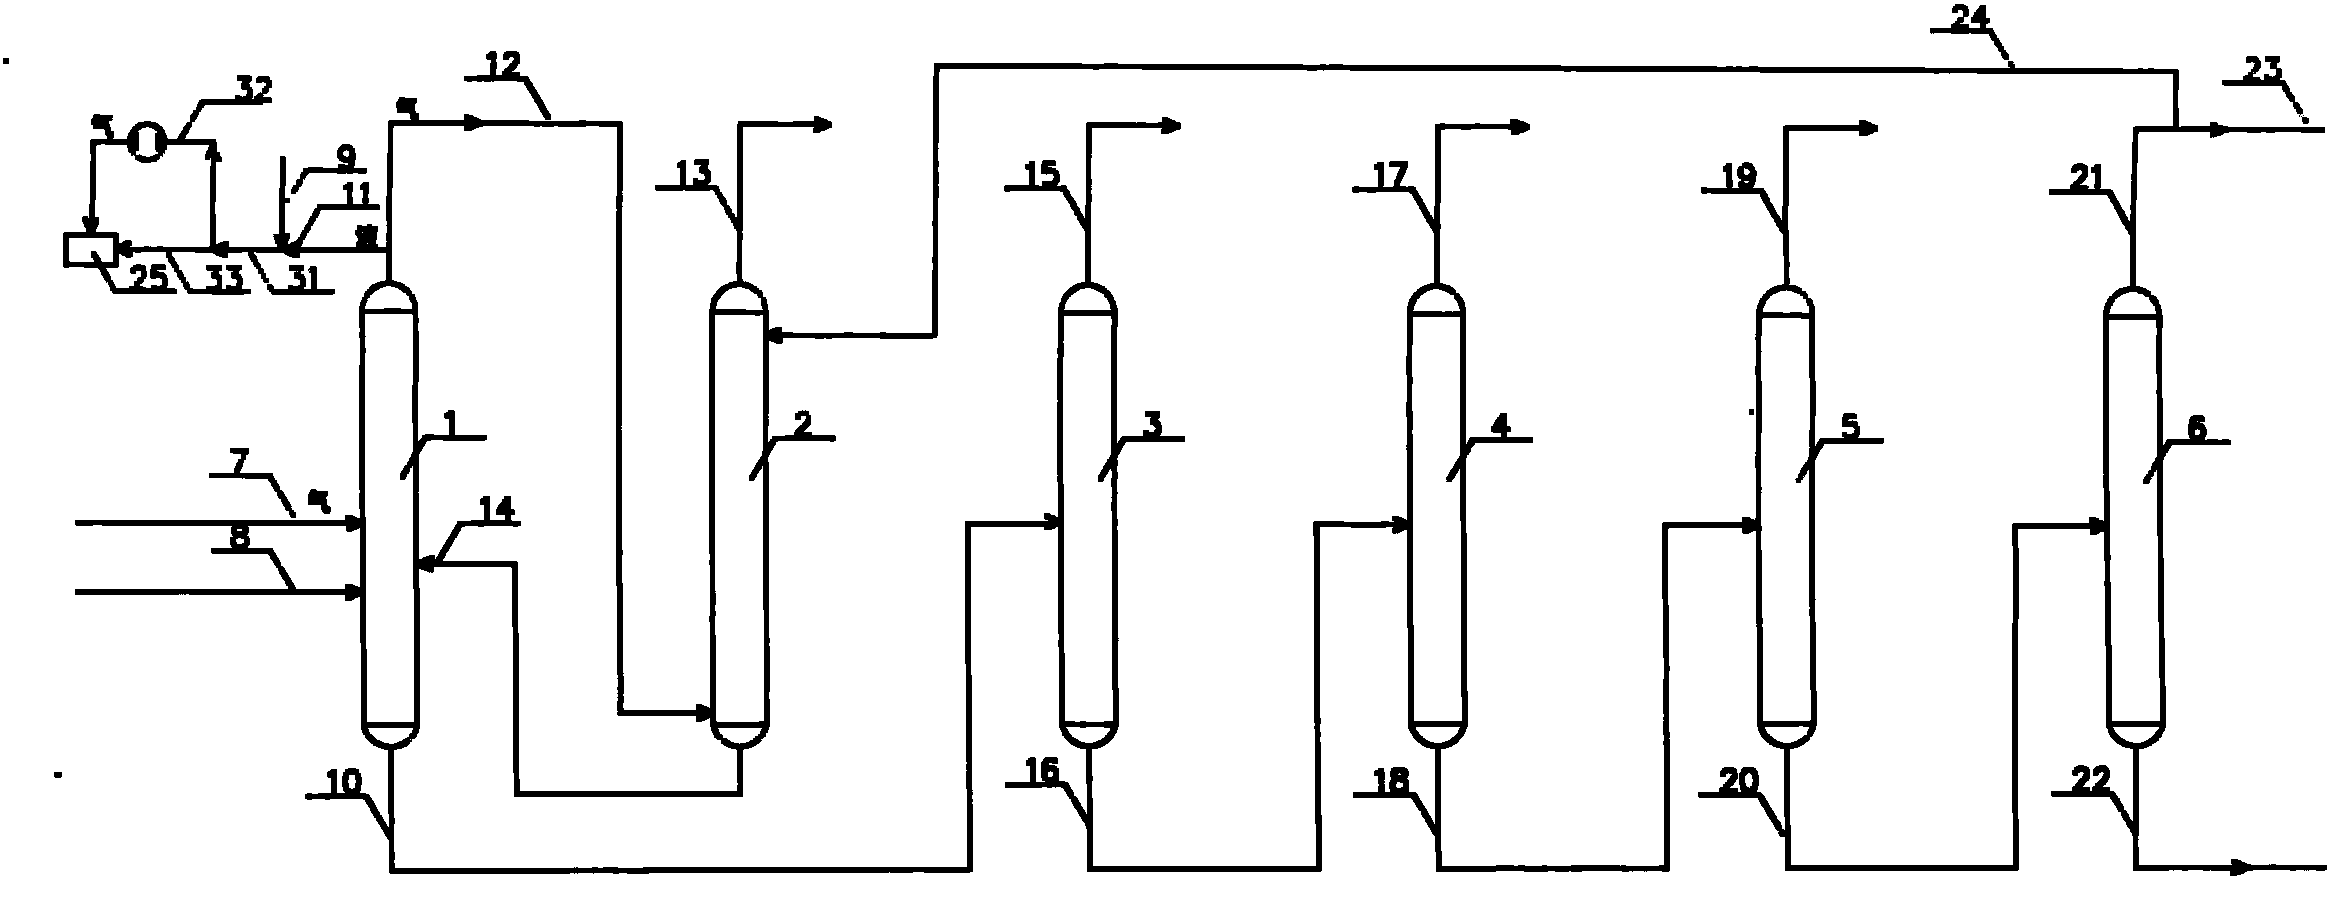 Separation process for producing ethylbenzene and/or propylbenzene product from gas containing ethylene and/or propylene by gas phase process